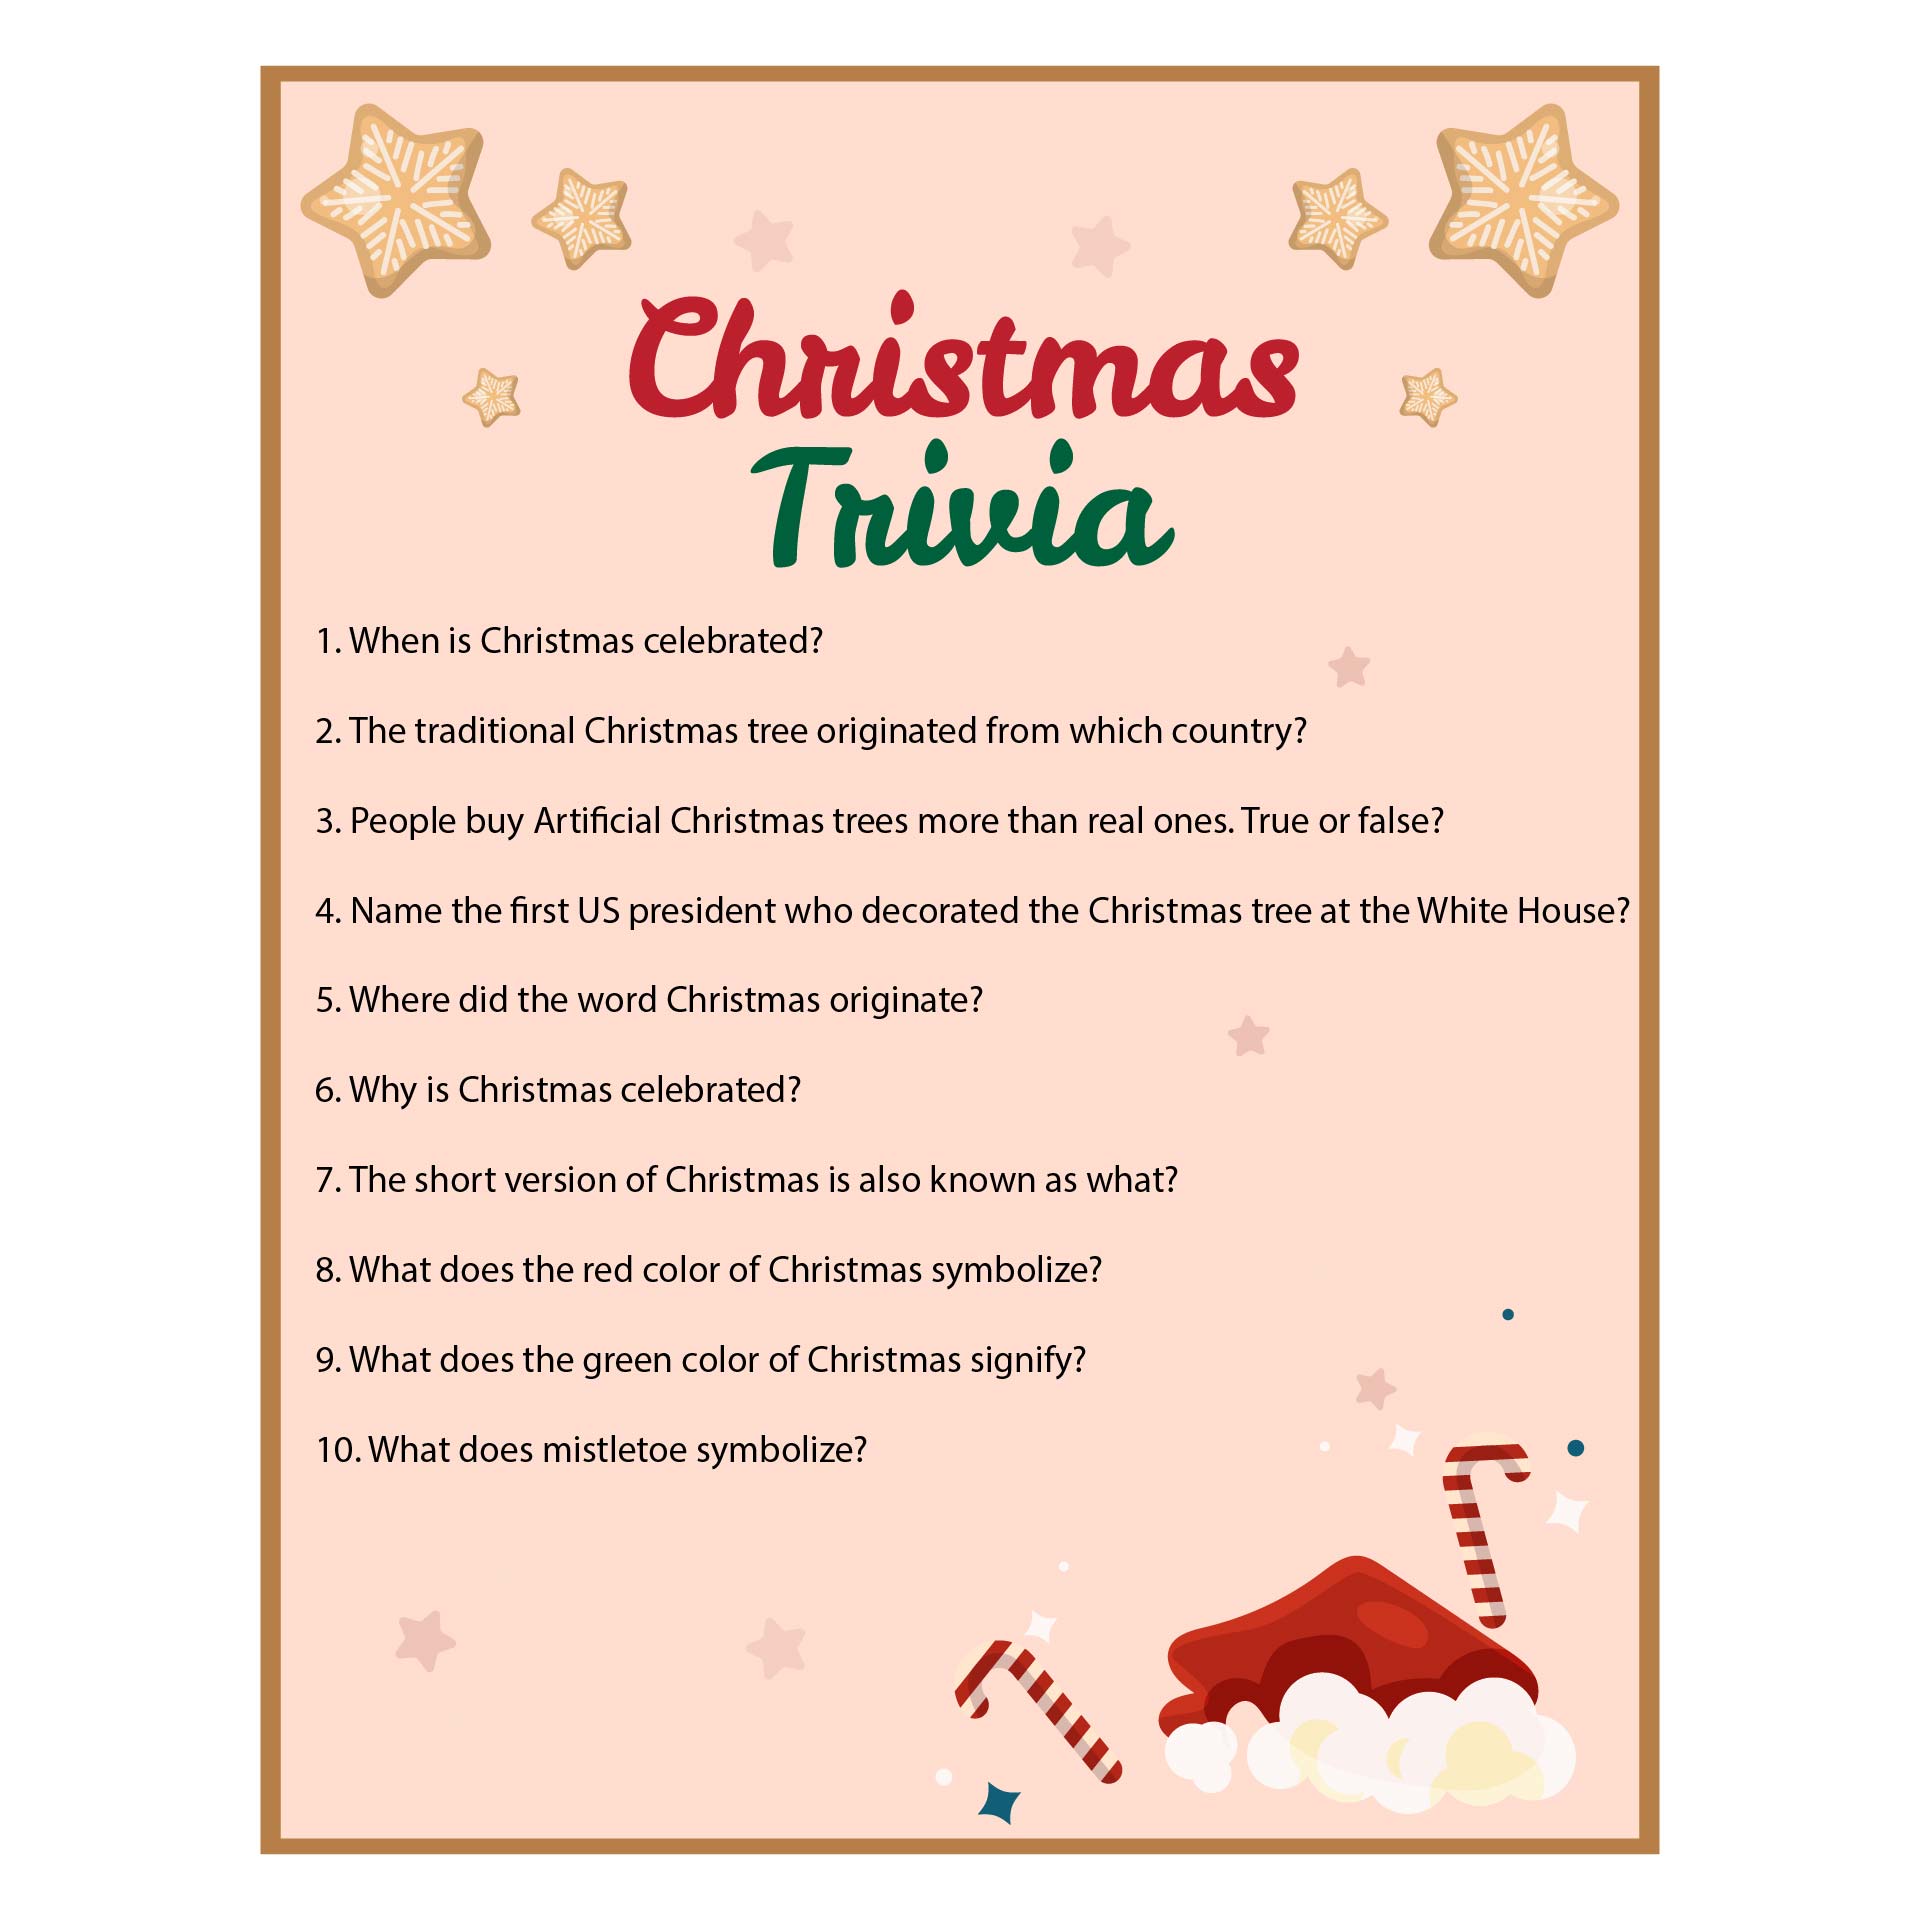 Fun Family Christmas Quiz Questions & Answers Printable